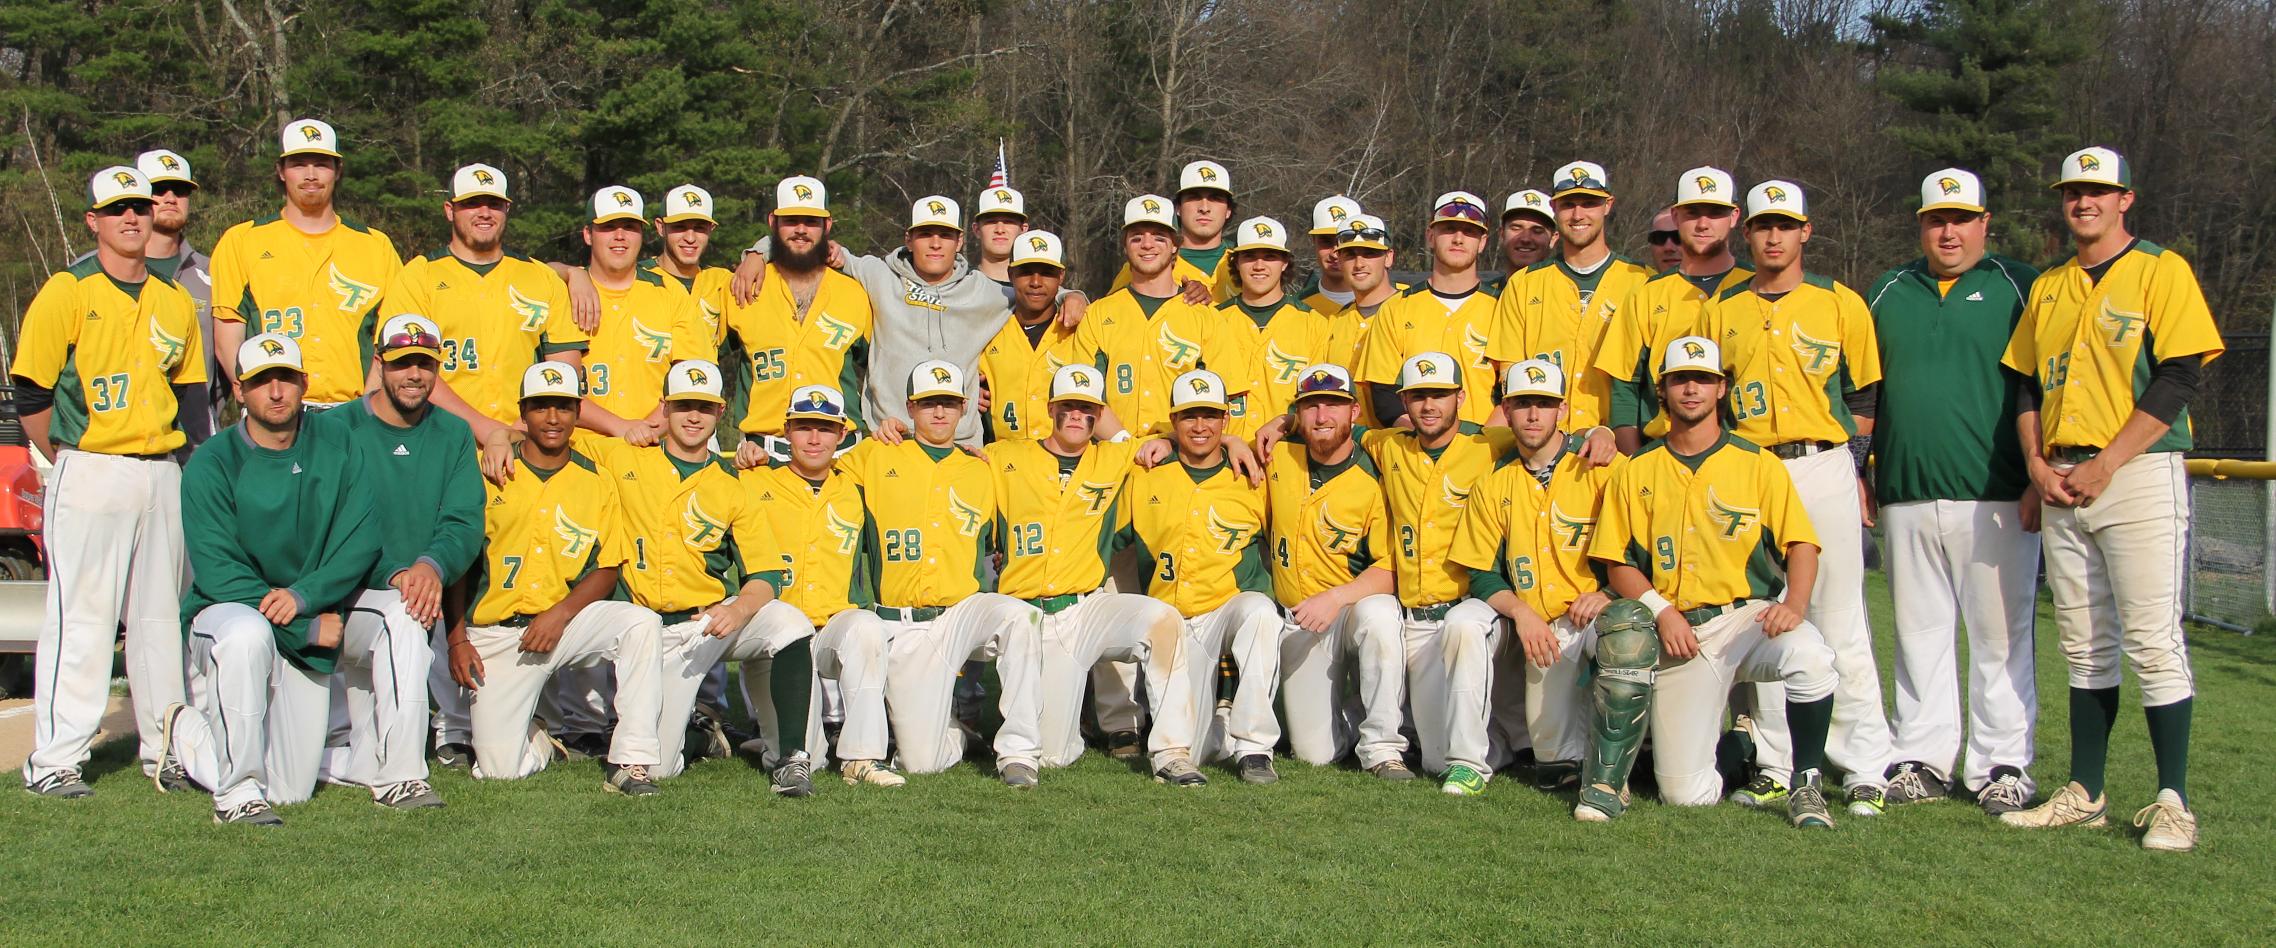 Falcons Knocked Out of MASCAC Tourney After 7-2 Loss to Westfield State